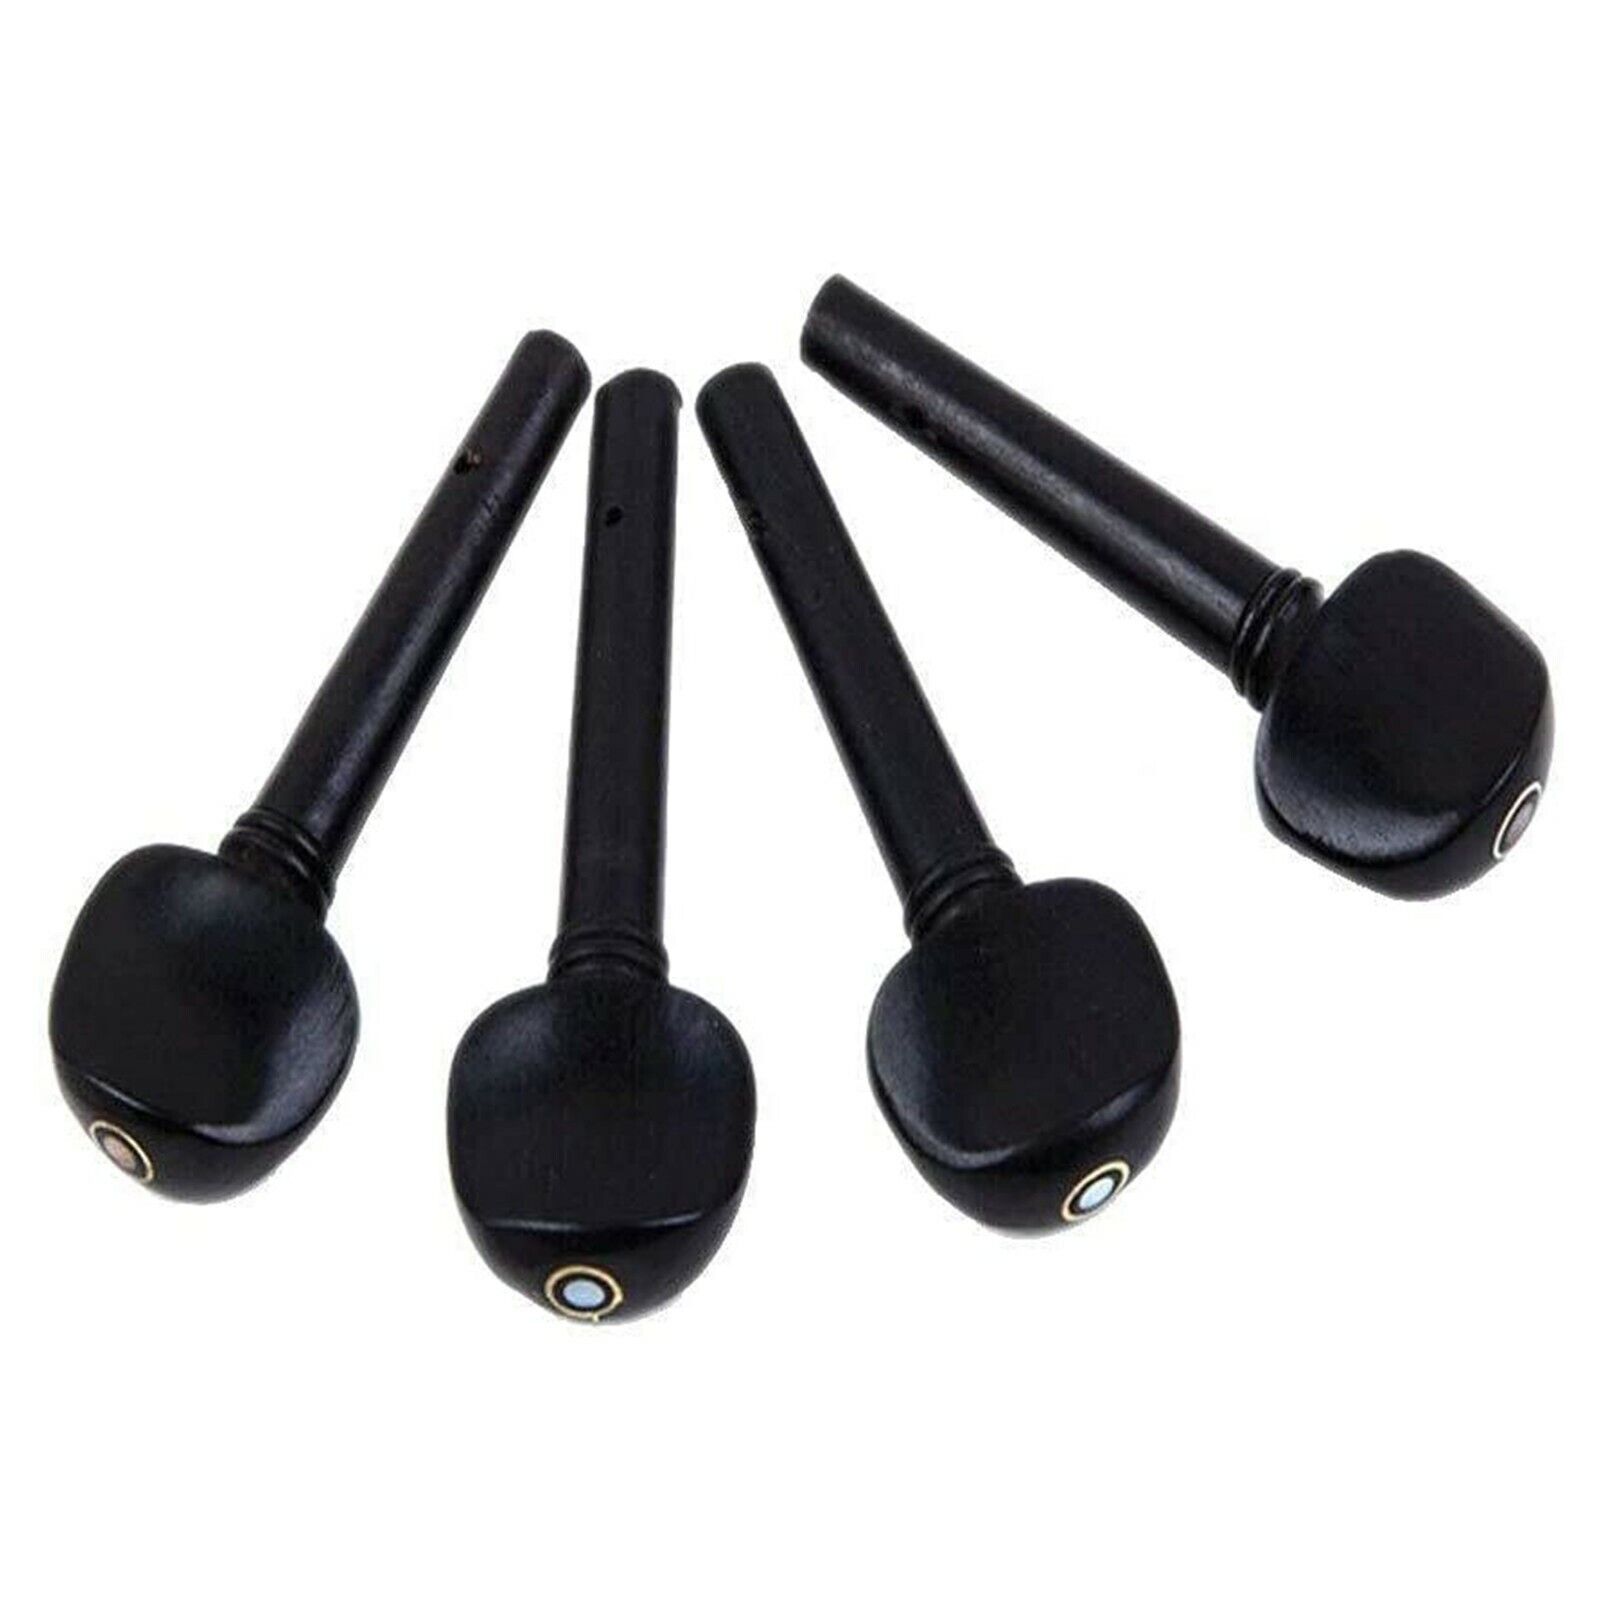 Adore Pro Violin Tuning Pegs with Fish Eye Set of 4 Black Ebony Wood for 4/4 